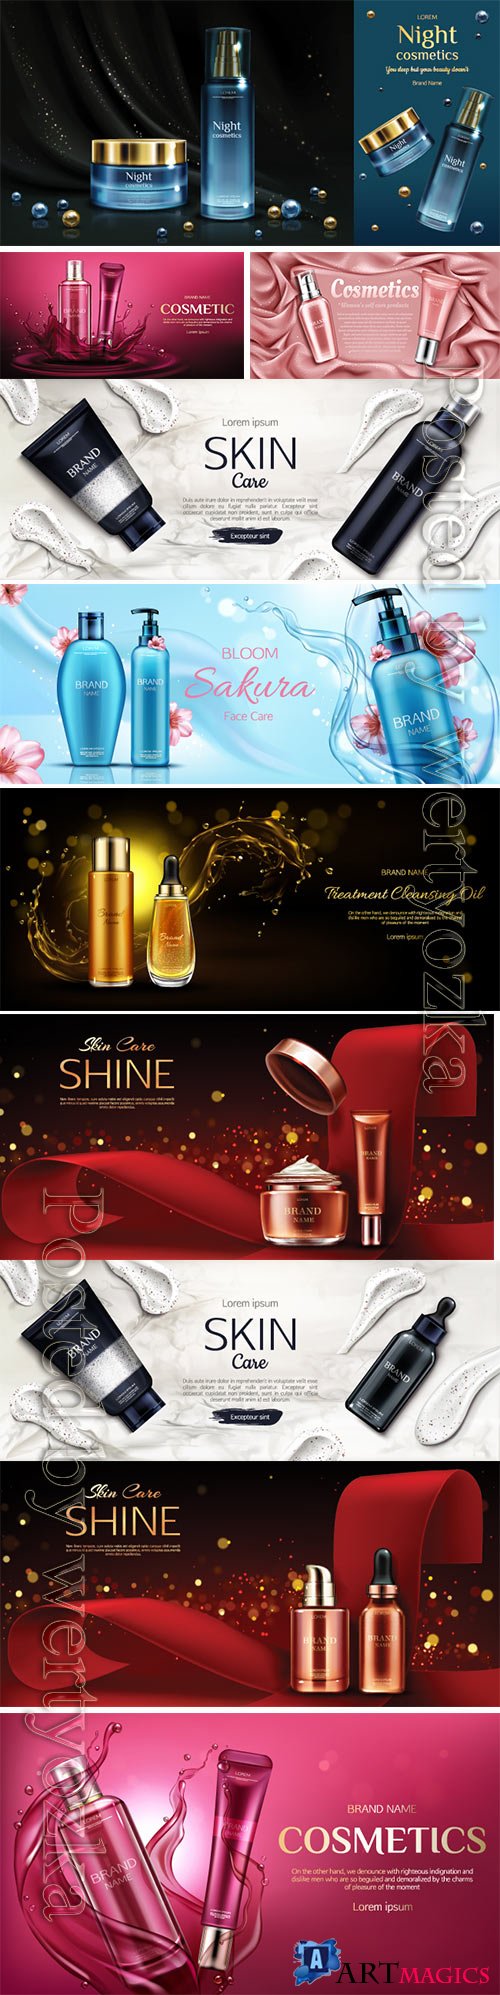 Cosmetic beauty ads flyer vector illustration